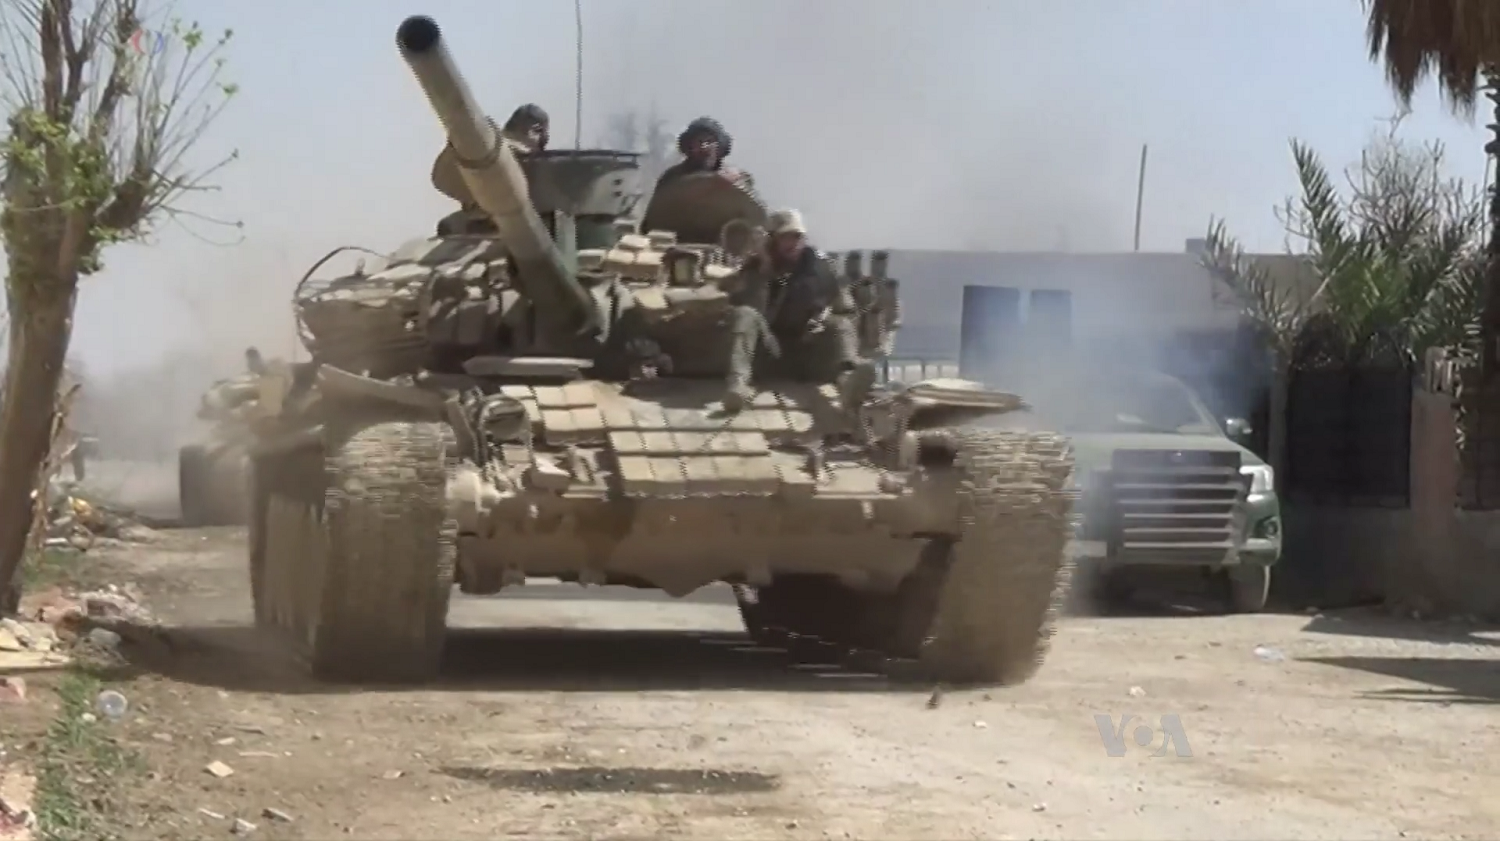 https://upload.wikimedia.org/wikipedia/commons/f/f2/Syrian_Army_tanks_1_%28Operation_Damascus_Steel%2C_March_2018%29.png